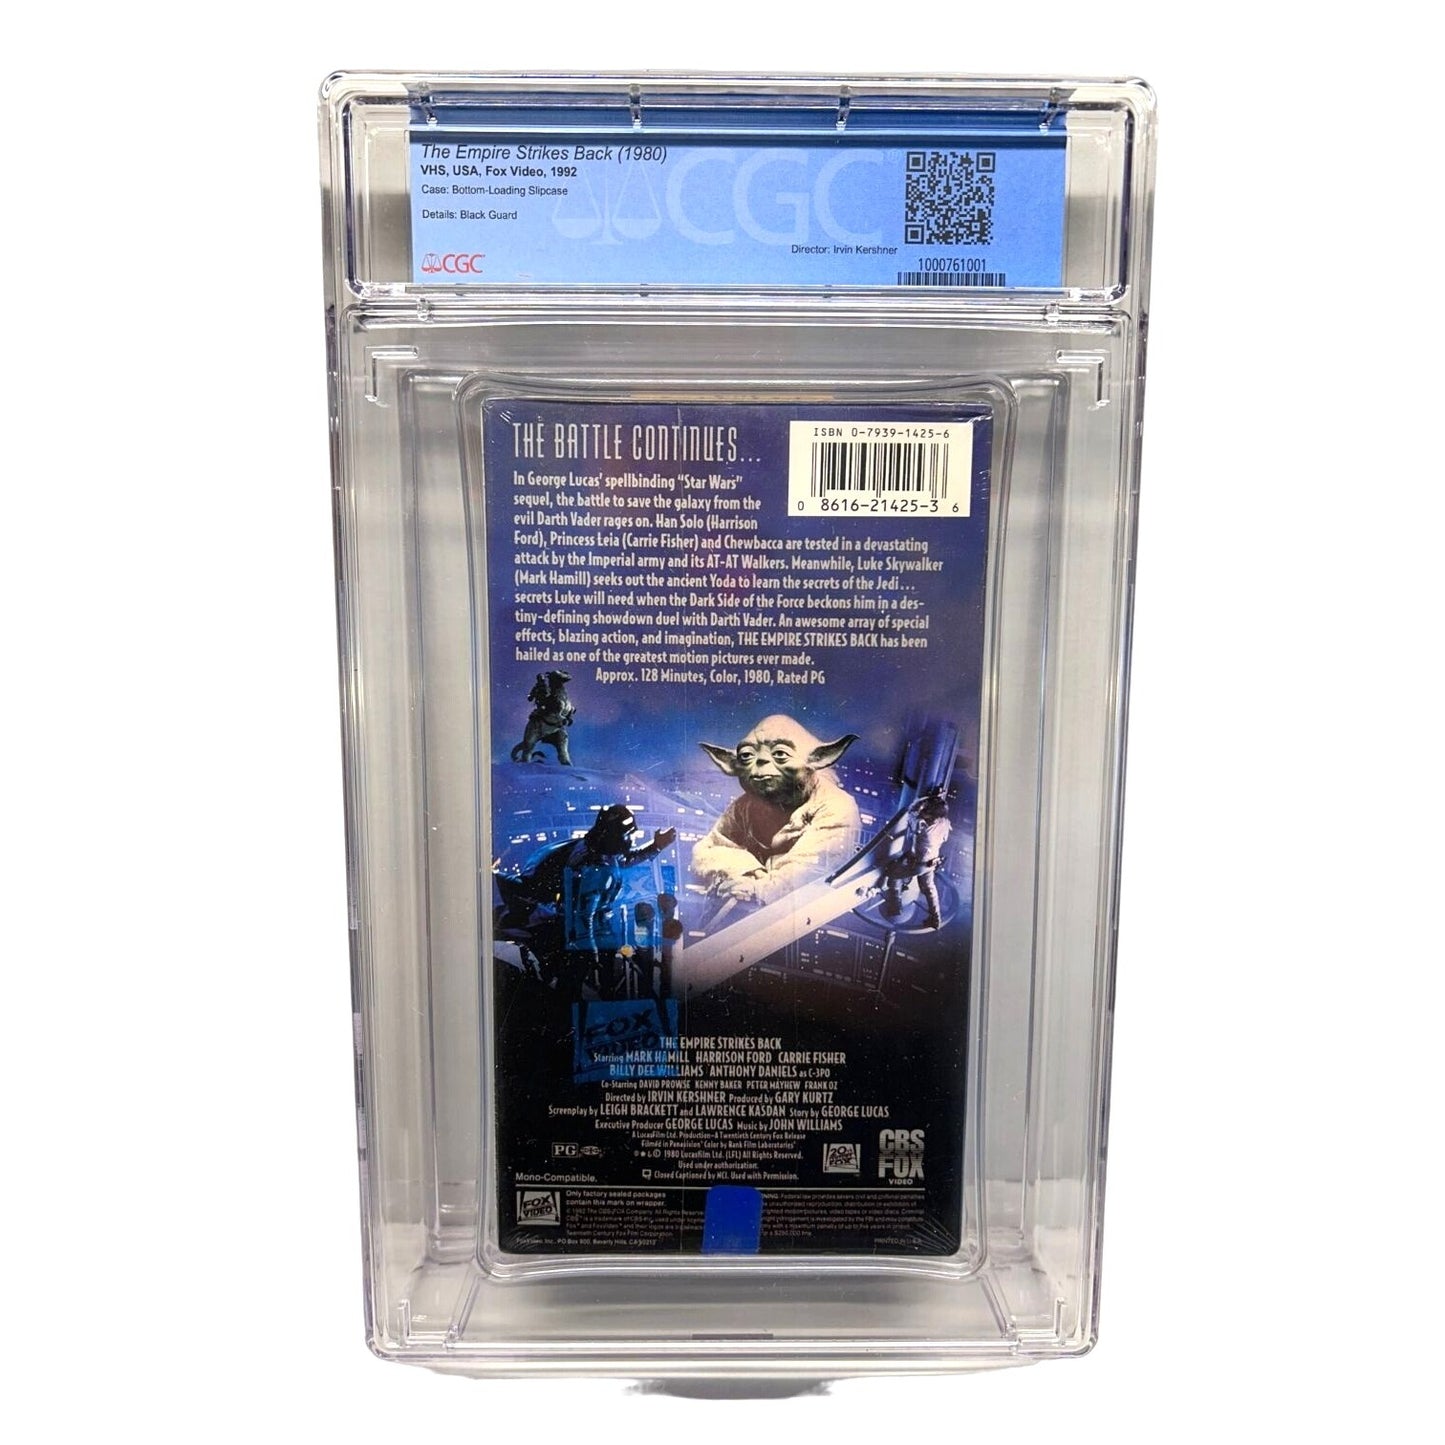 Star Wars: The Empire Strikes Back (VHS) CGC Graded 9.2 SEALED A+